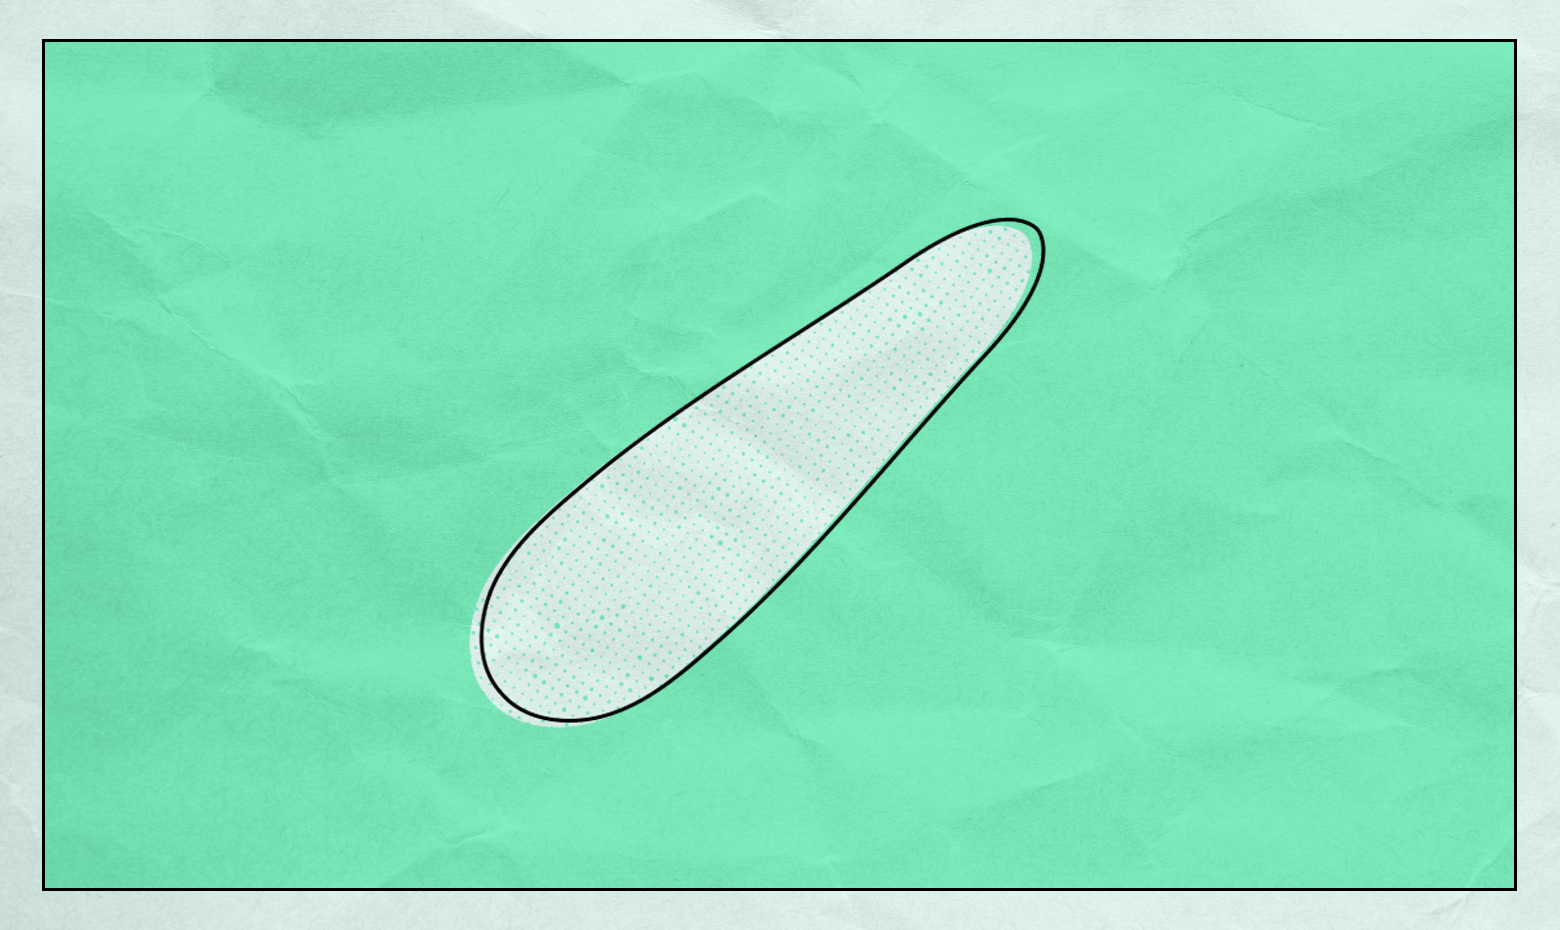 An illustration of an oblong toy